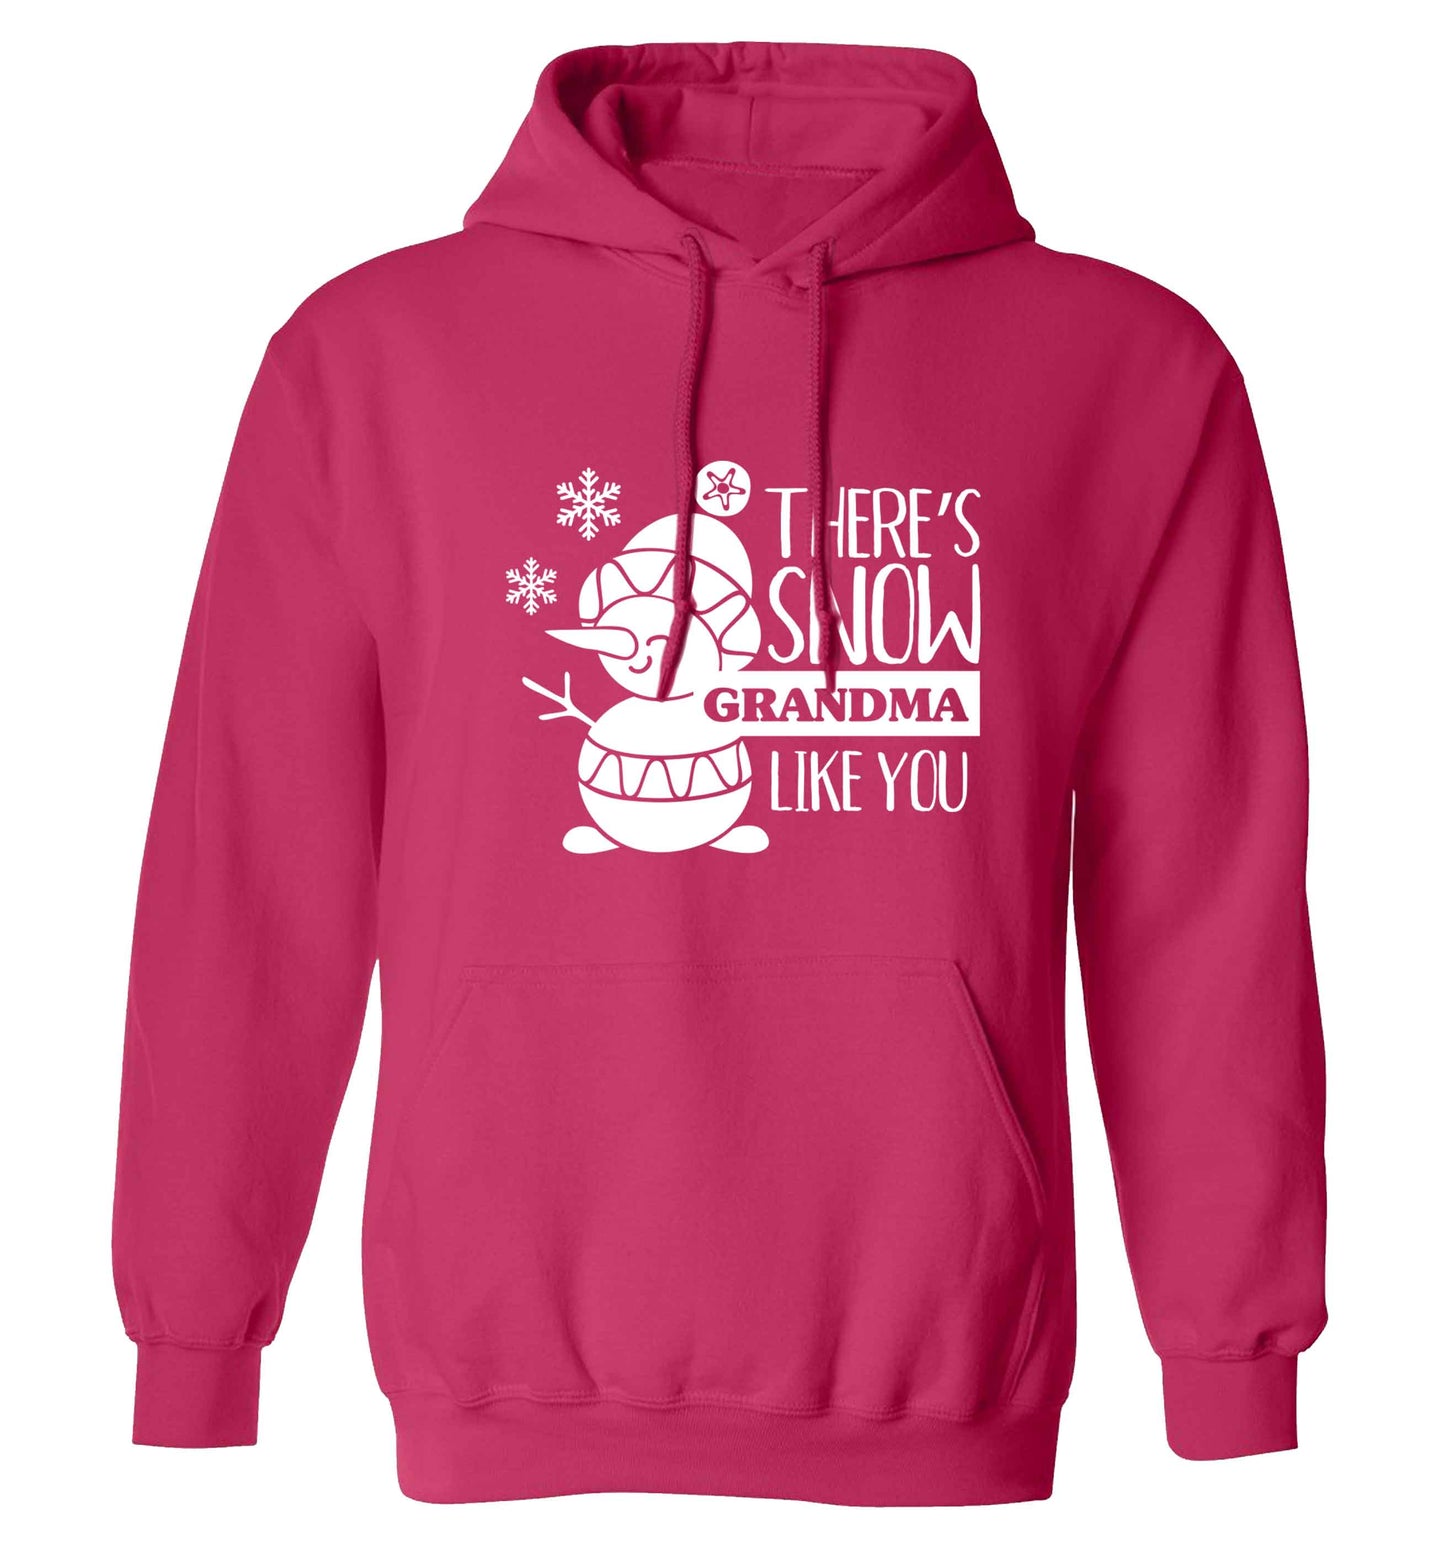 There's snow grandma like you adults unisex pink hoodie 2XL